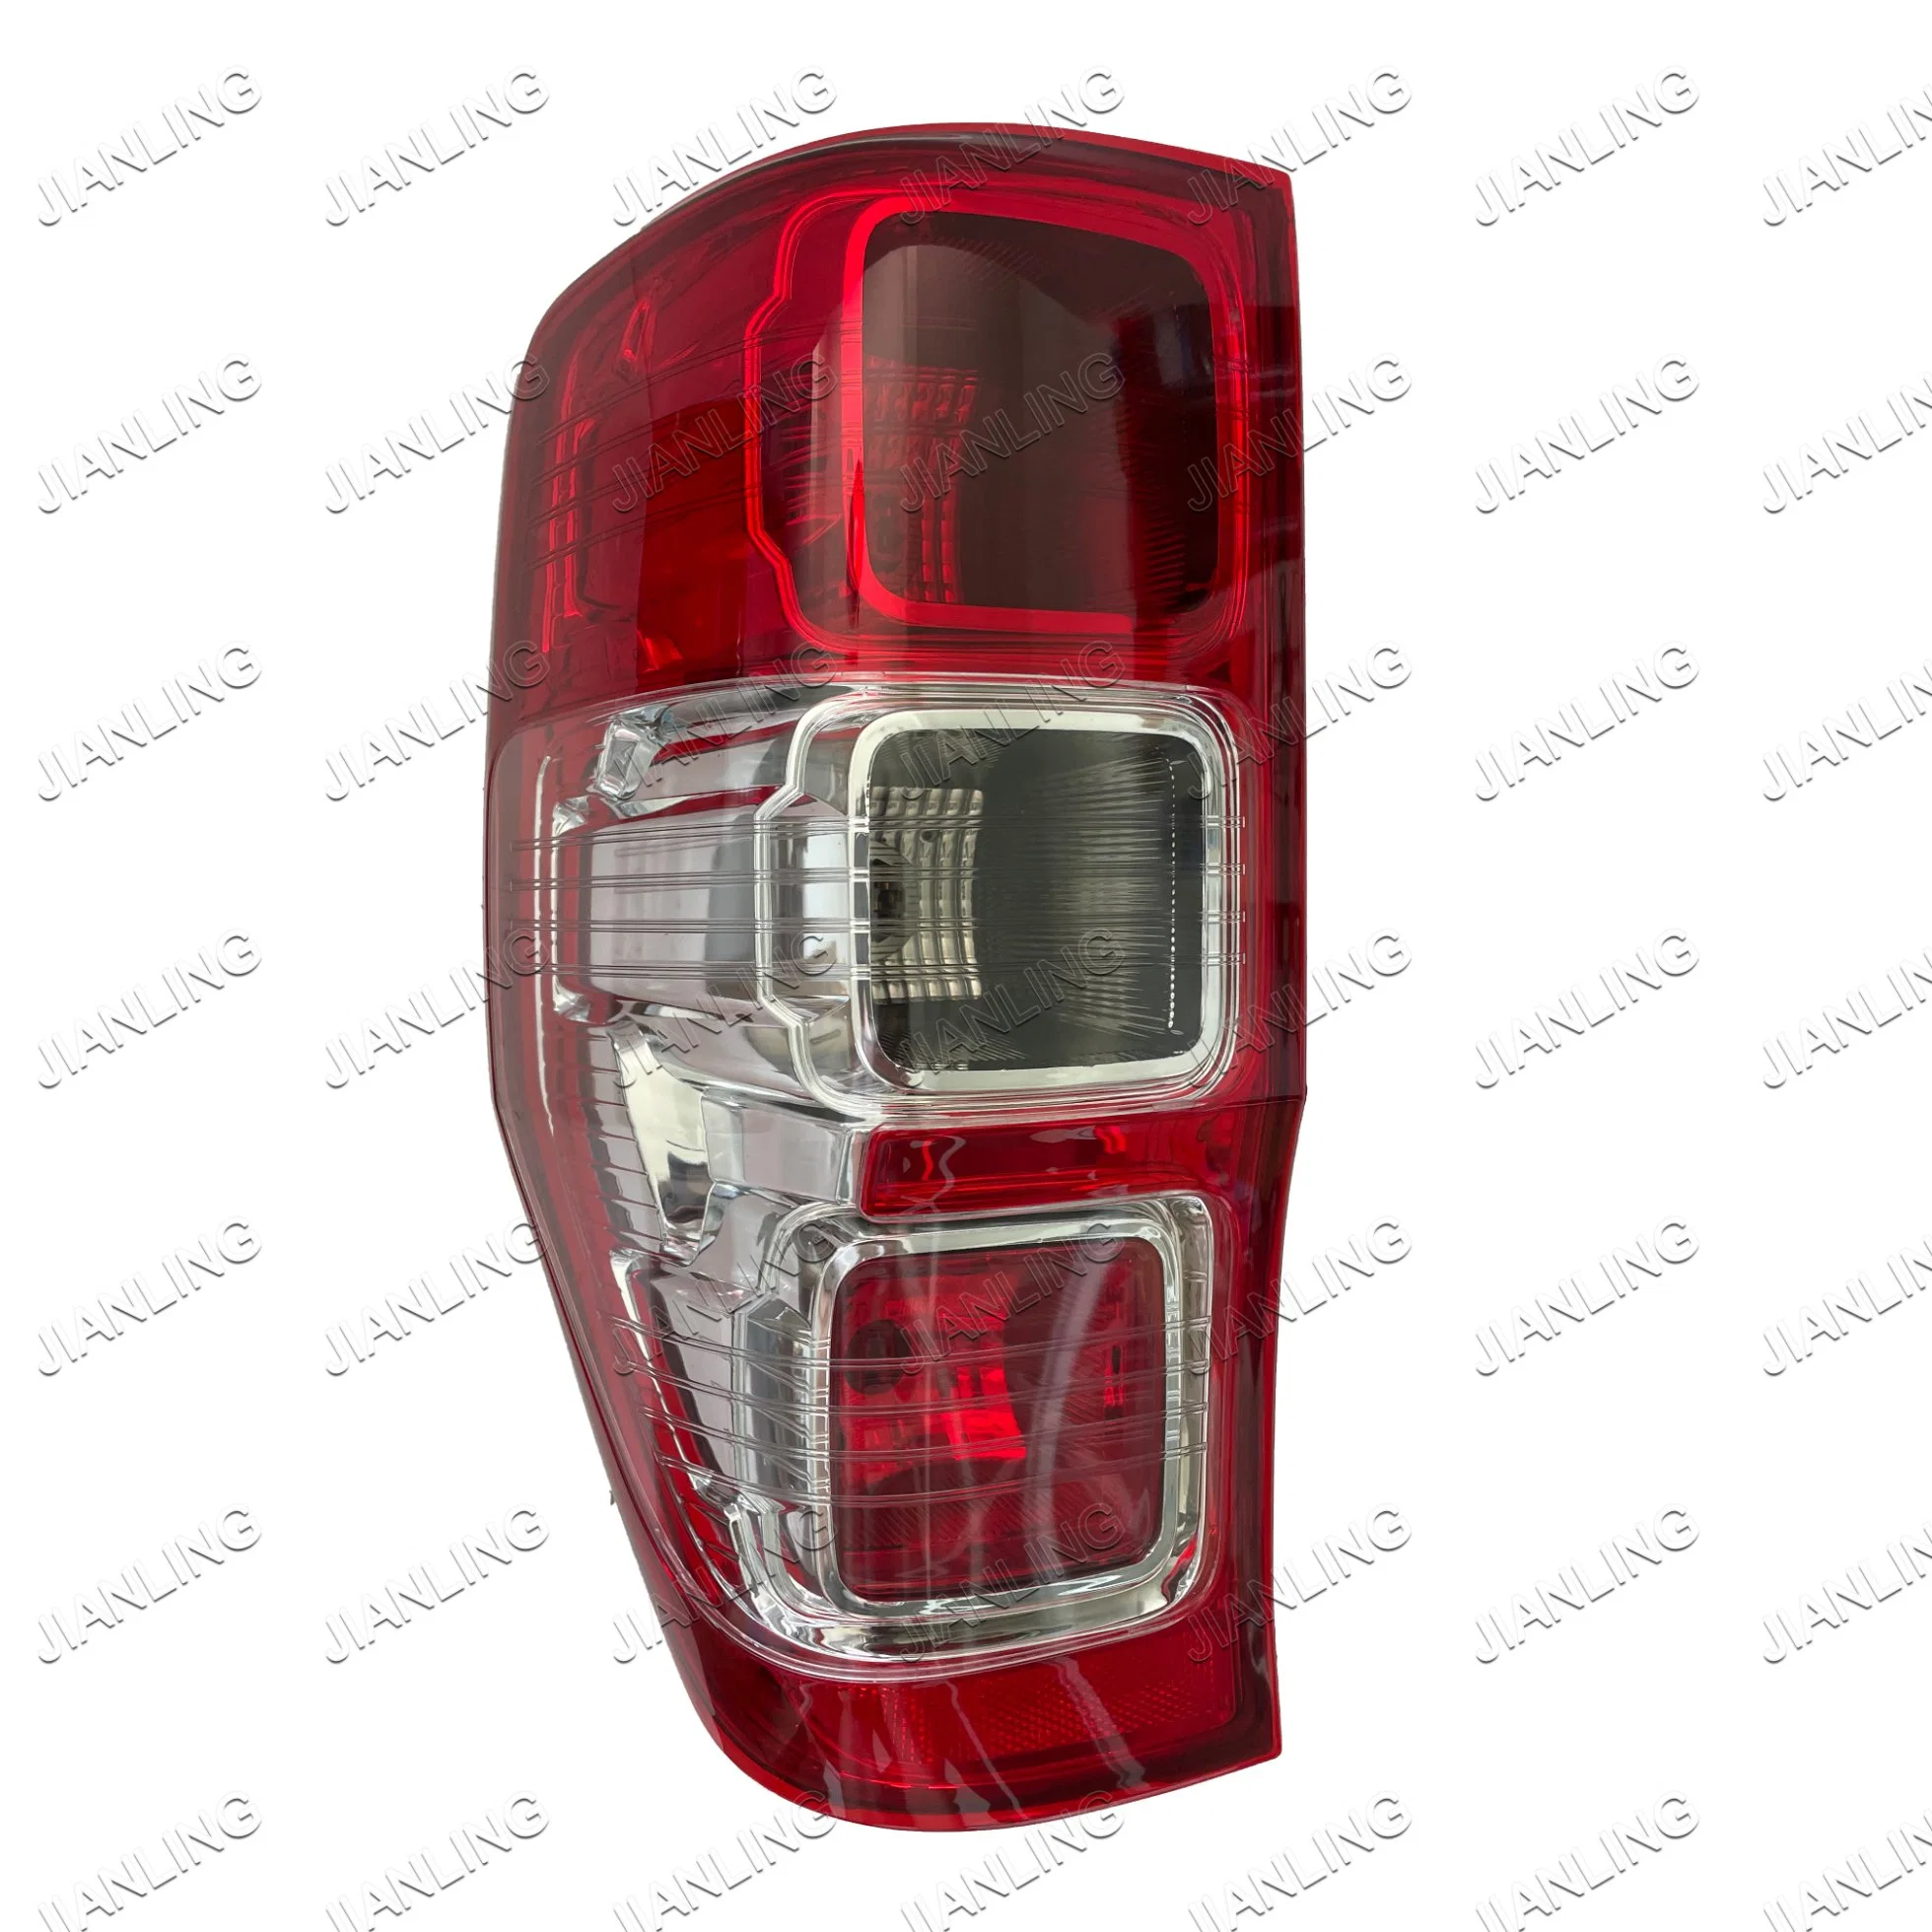 Auto Pick-up Tail Lamp for Ford Ranger 2012 Ab39-13404 Ab39-13405